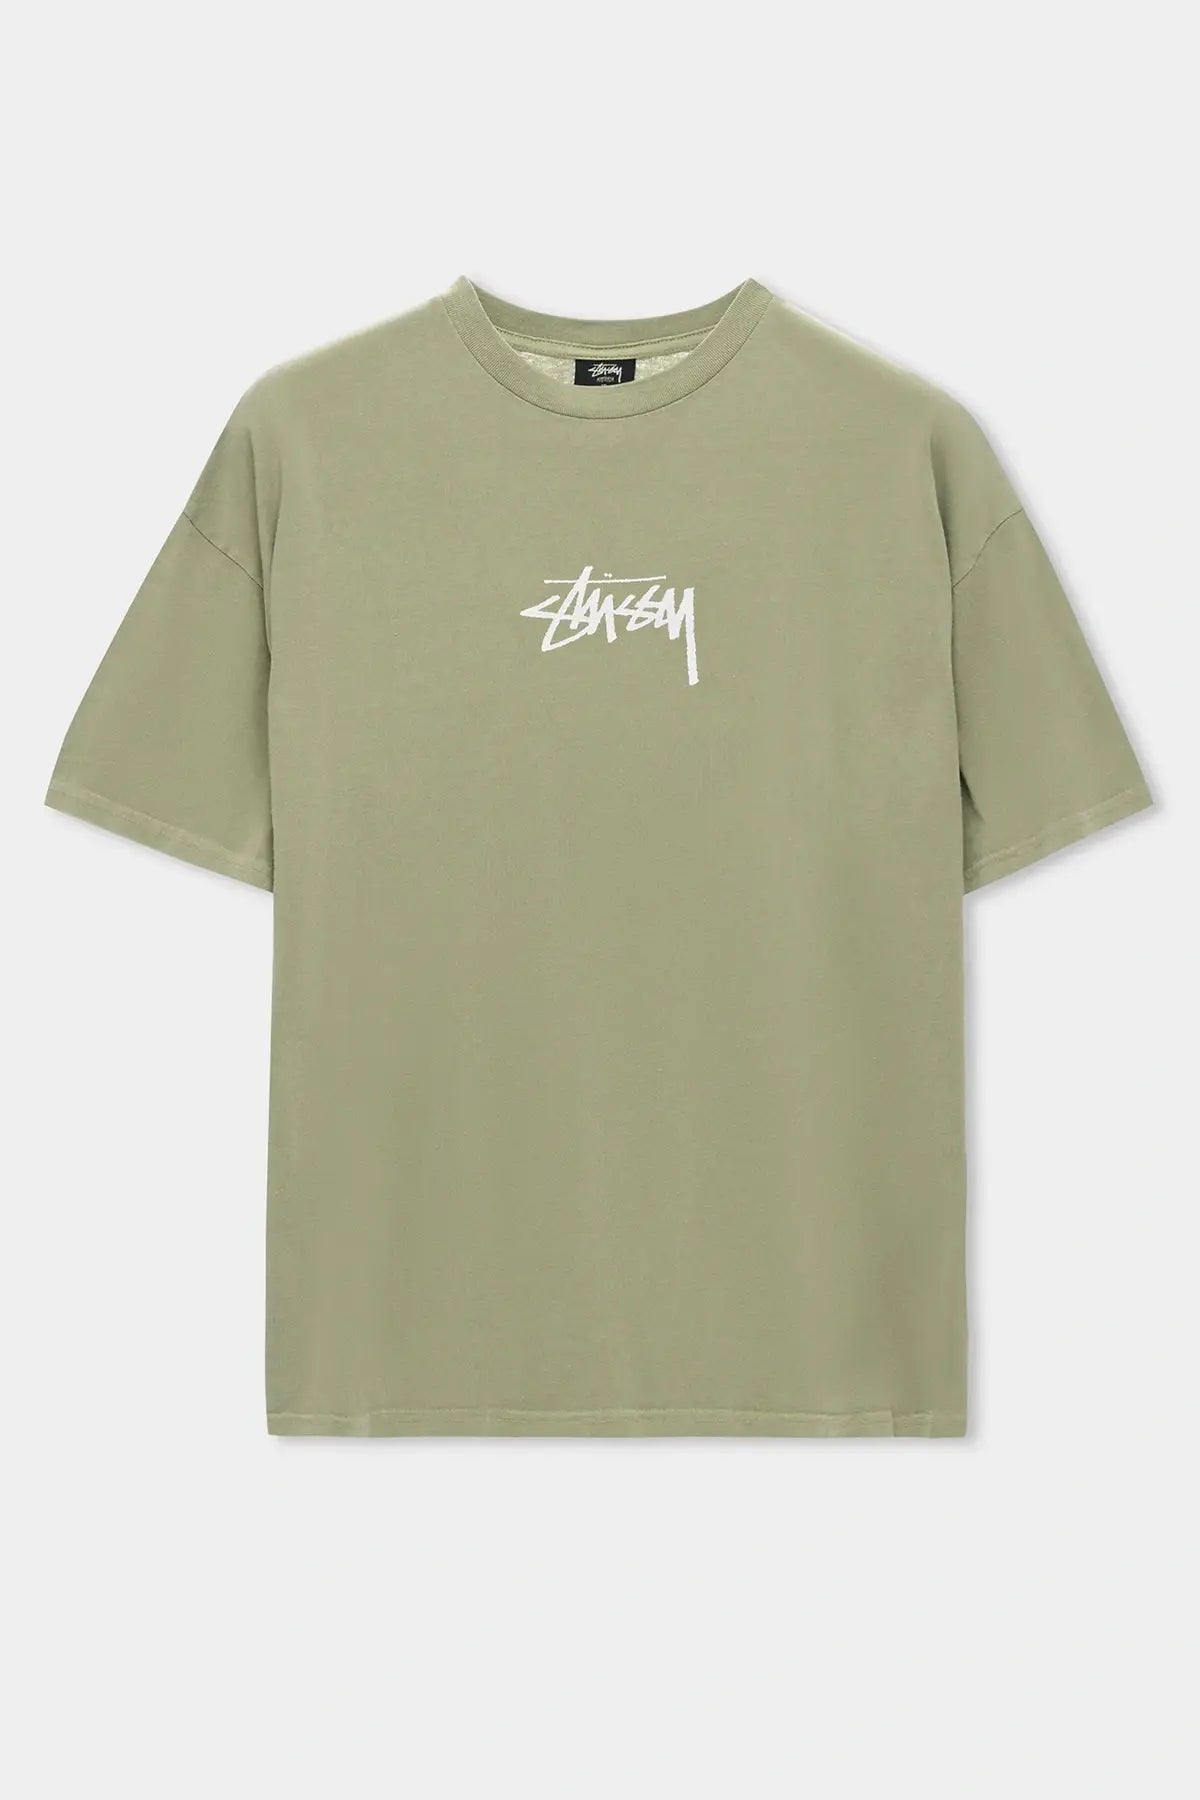 Stussy Stock Pigment Relaxed Tee - Pigment Artichoke